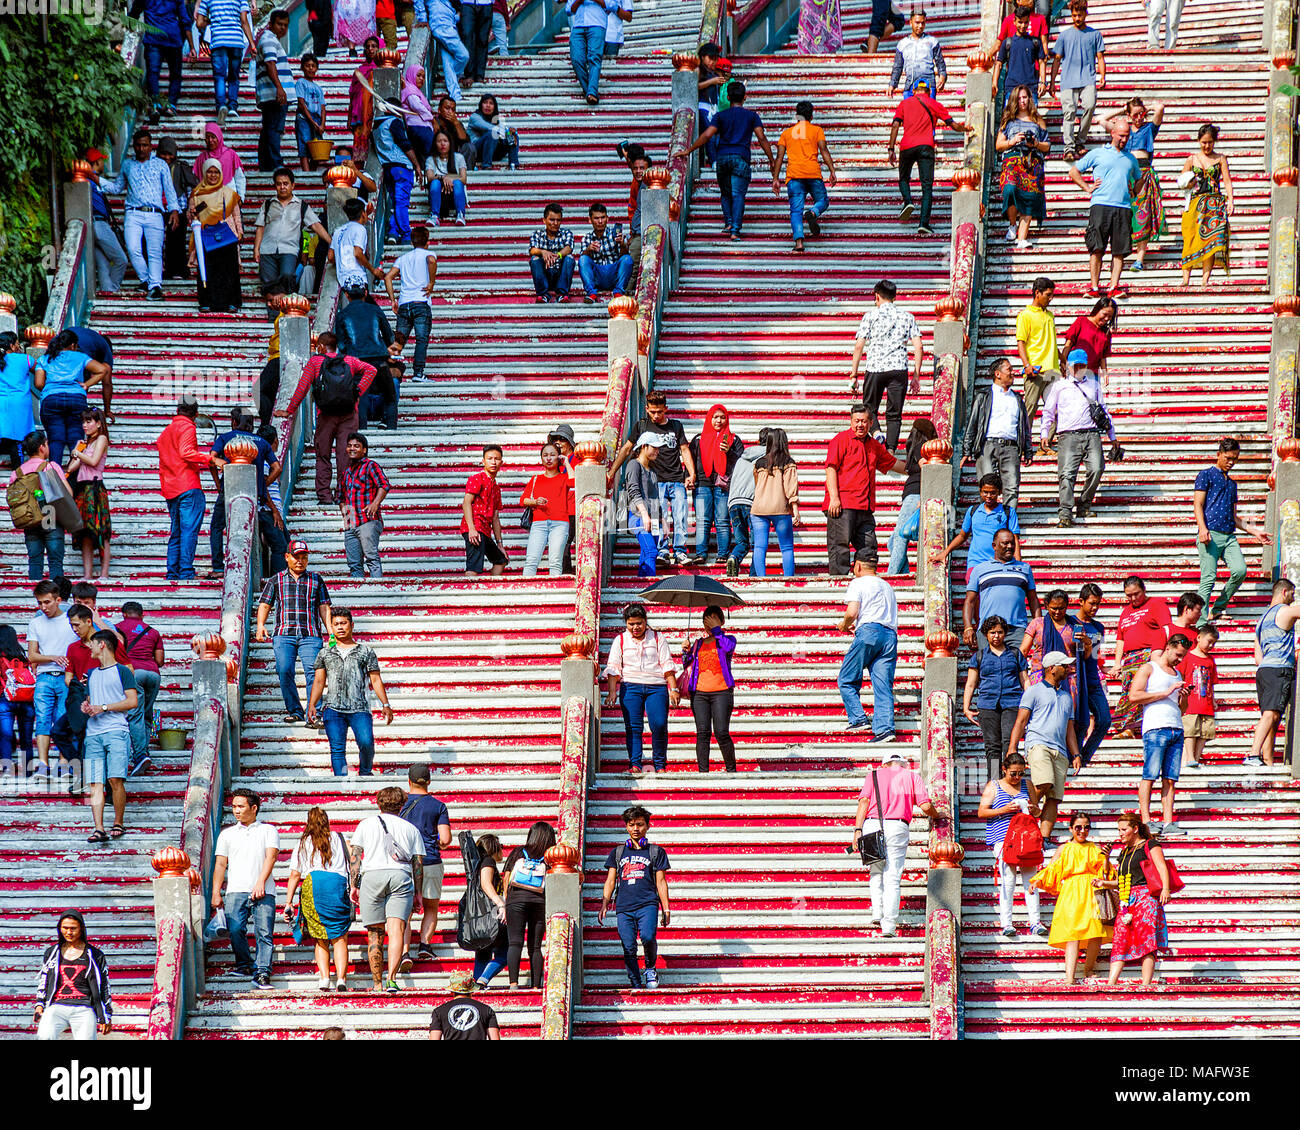 Kuala Lumpur, Malaysia, Batu Caves, 2018-02-16:  People move up stairs to visit sightseeing, concept of tourism and curiosity. Stock Photo